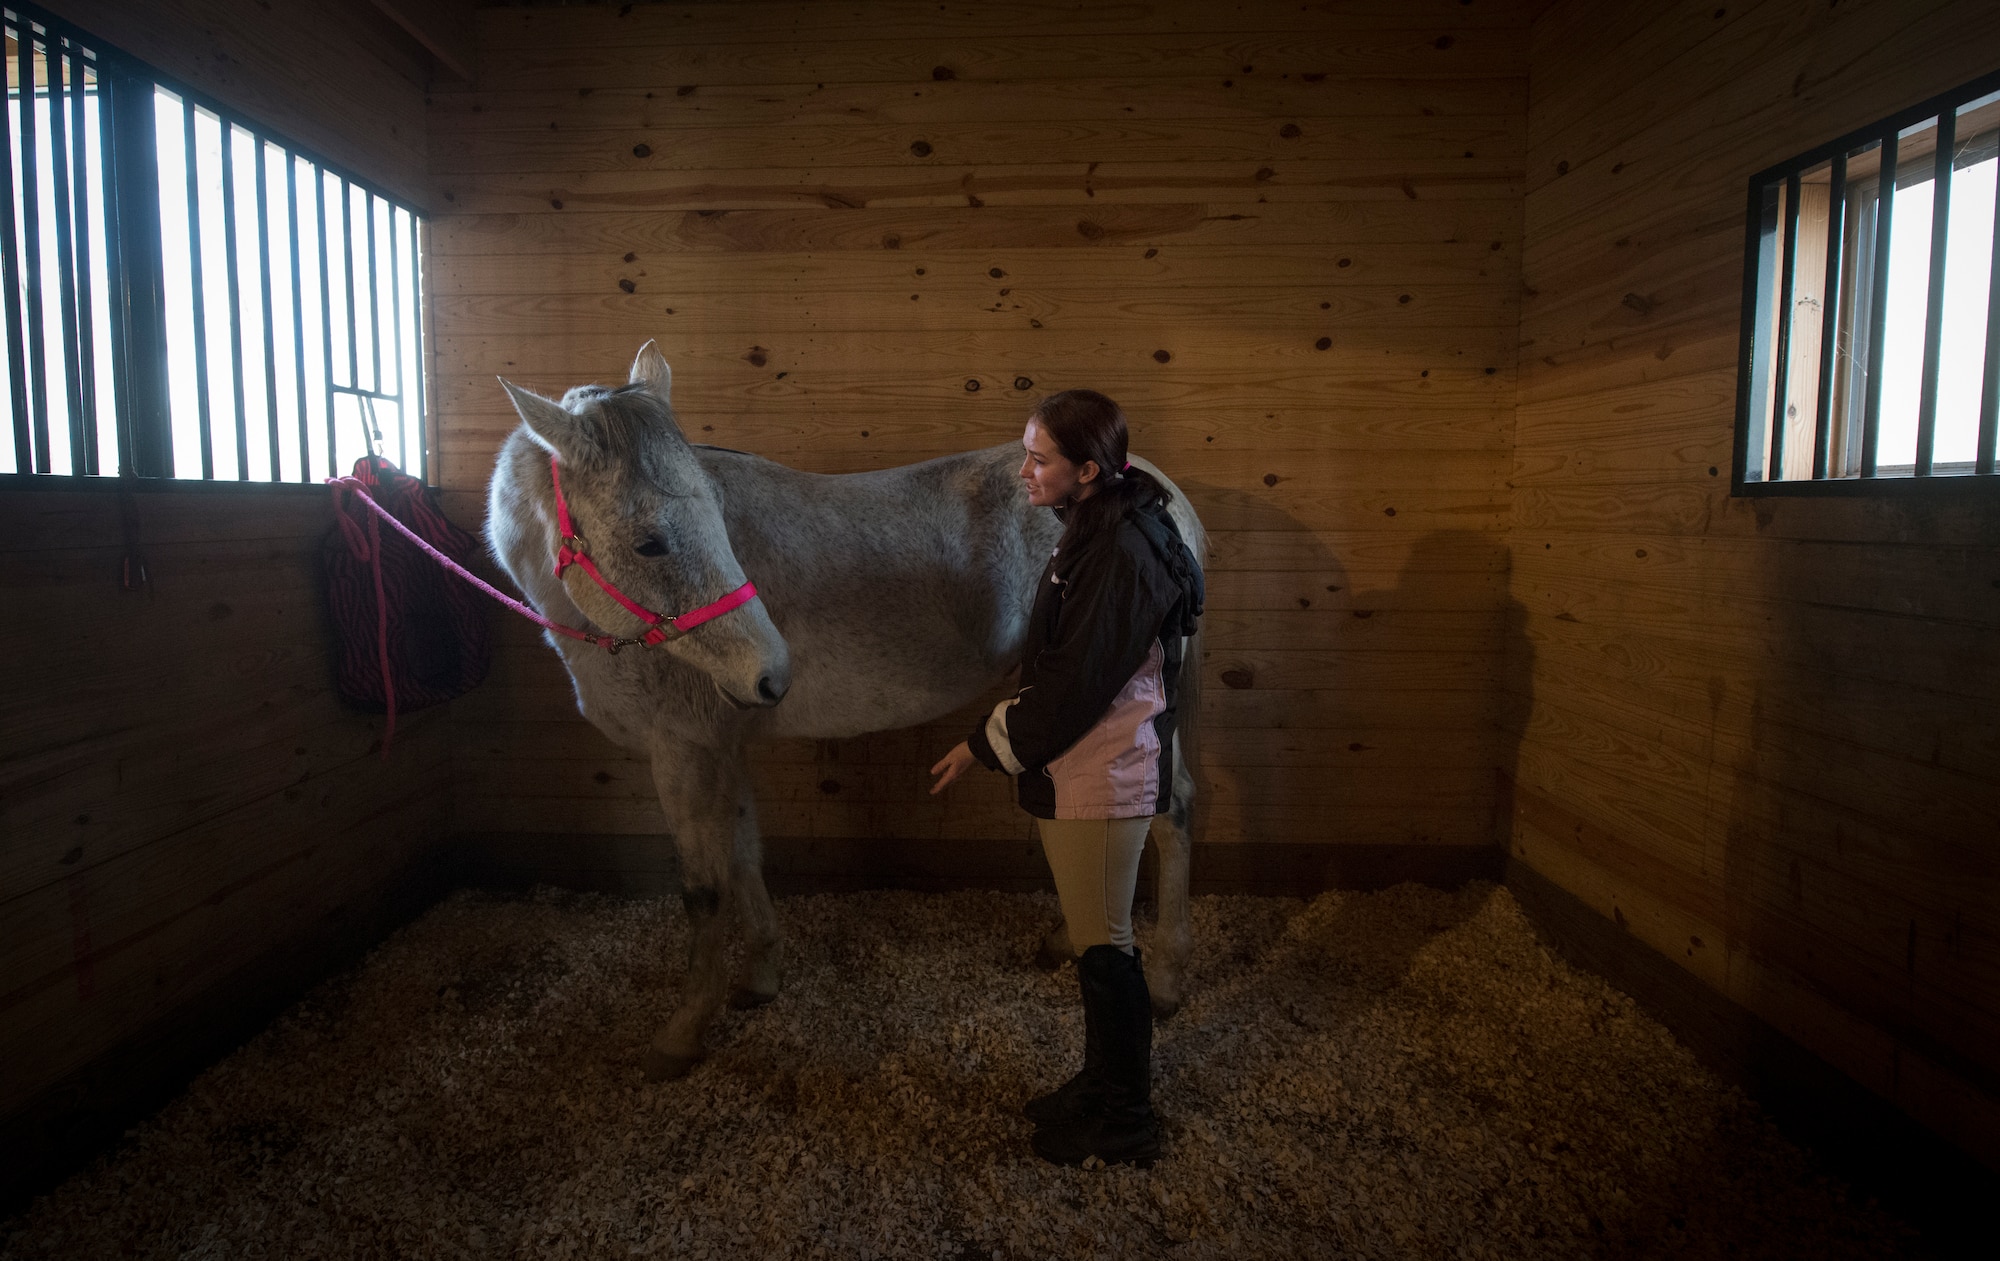 Airman 1st Class Kaitlyn Evans guides Kobalt after cleaning him inside a horse stable in Lothian, Maryland. Evans, a North Carolina native and 11th Security Forces Squadron patrolman at Andrews Air Force Base, Maryland, relocated her horse at her own expense to continue participating in competitions with the horse. She often compares spending time with her horse to being with a family member in her hometown. (U.S. Air Force photo/Staff Sgt. Vernon Young Jr.)